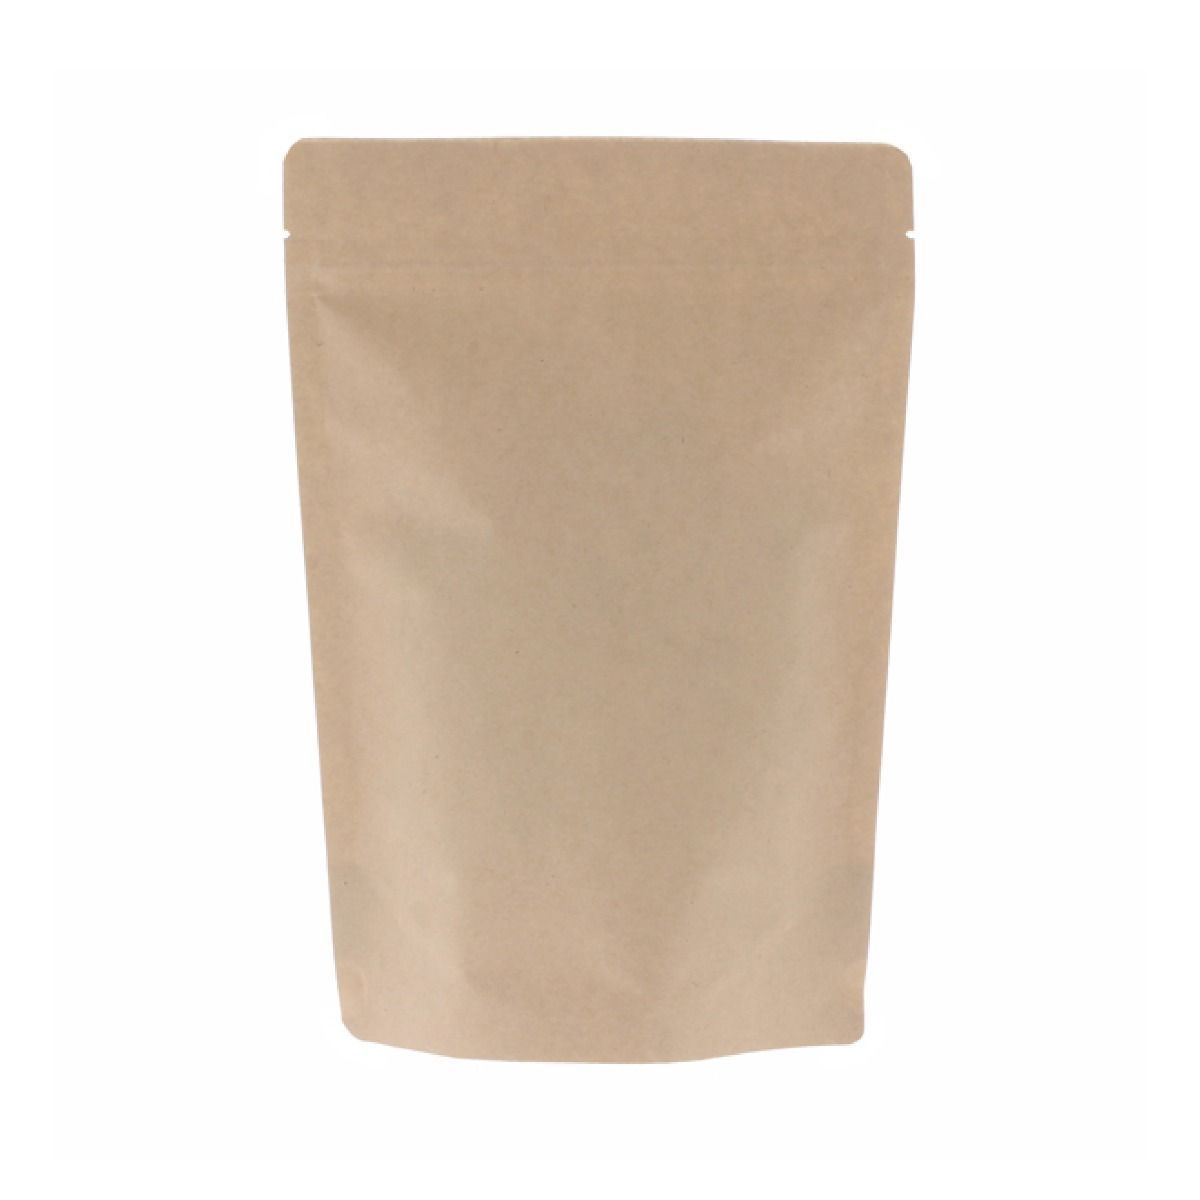 Stand-up pouch kraft paper - brown